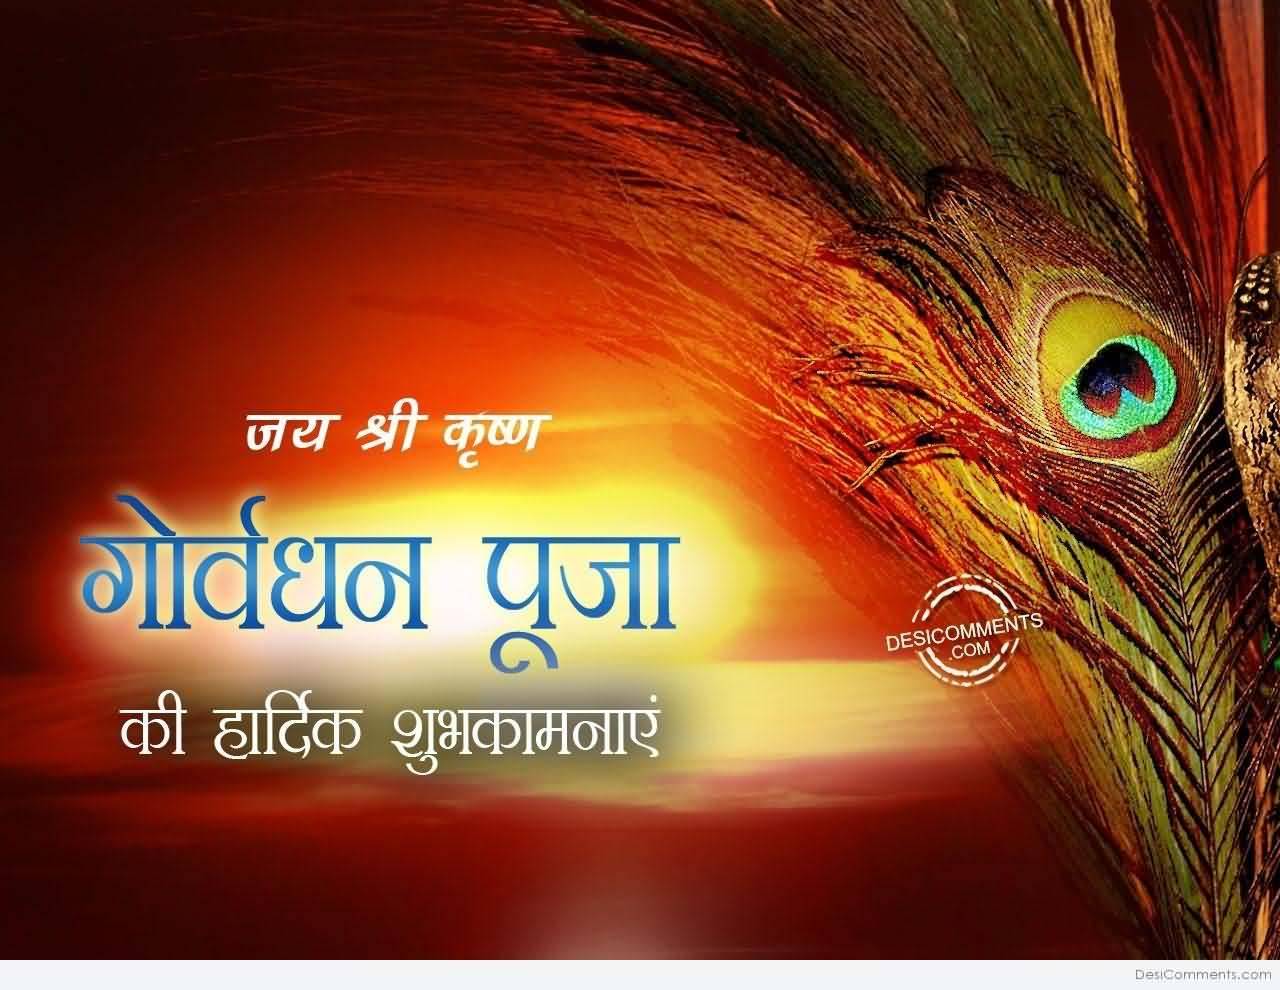 Happy Govardhan Puja hindi wishes peacock feather wallpaper